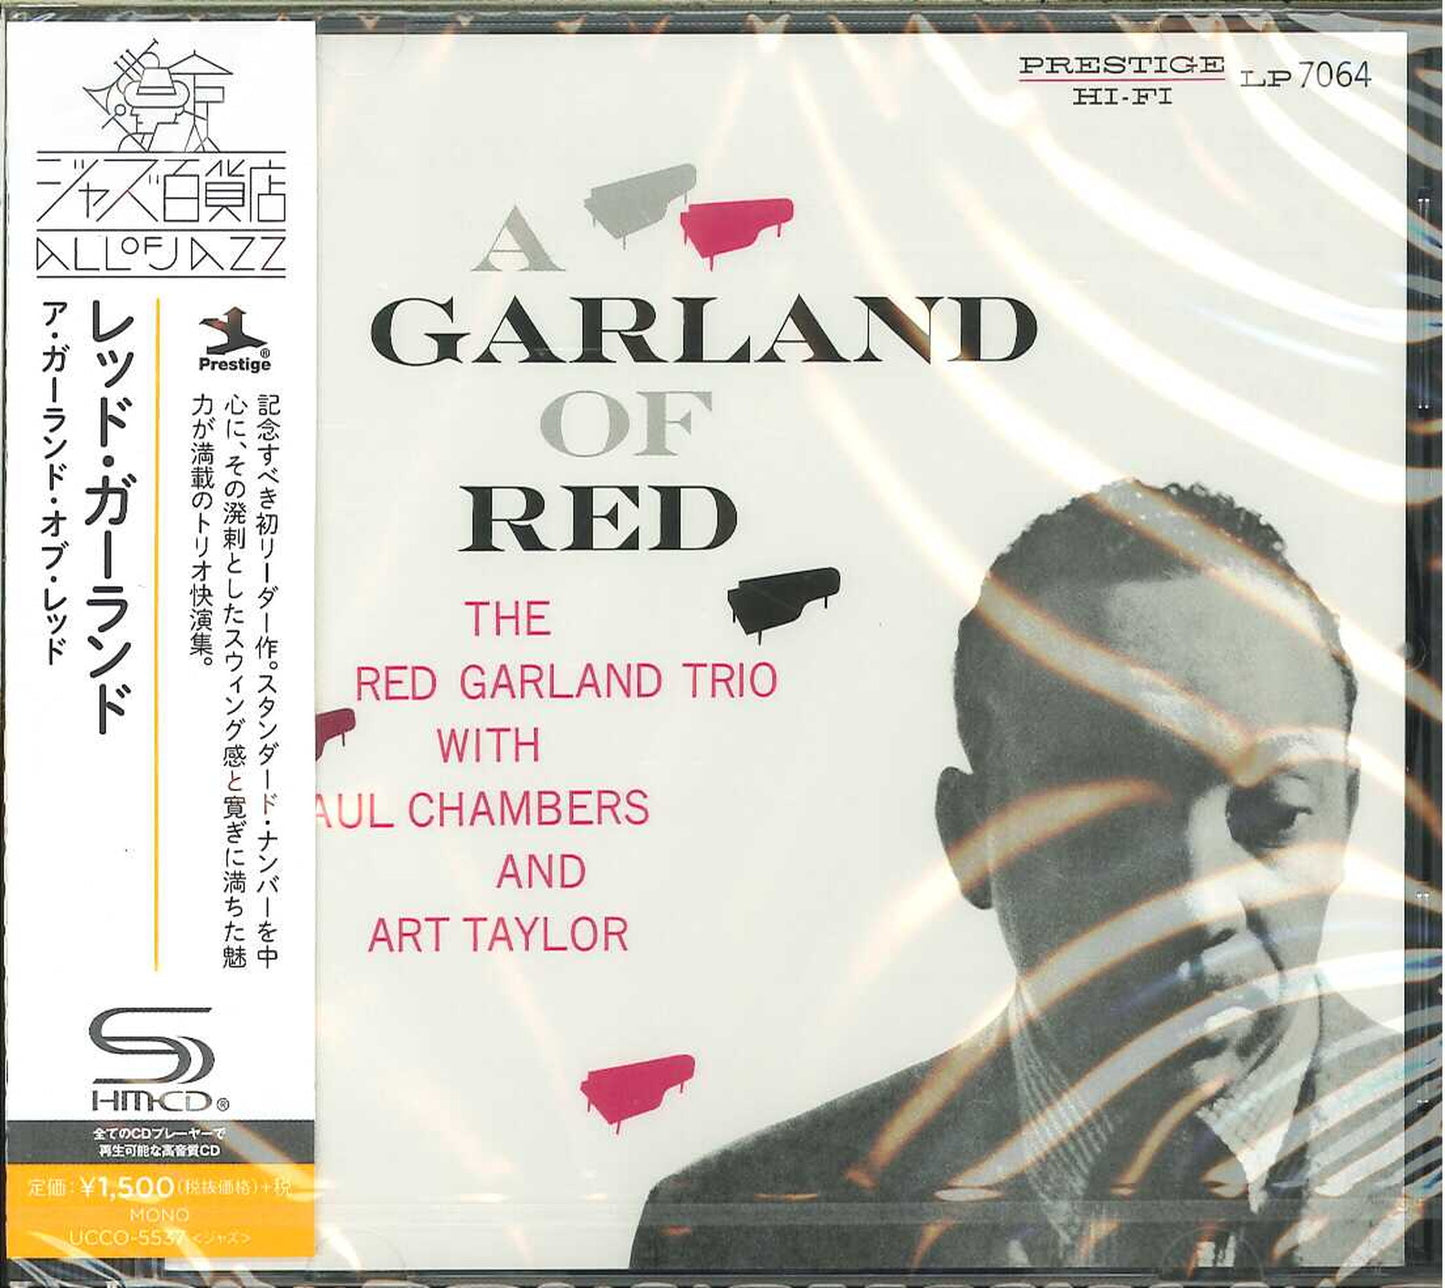 Red Garland - A Garland Of Red (Release year: 2016) - Japan  SHM-CD